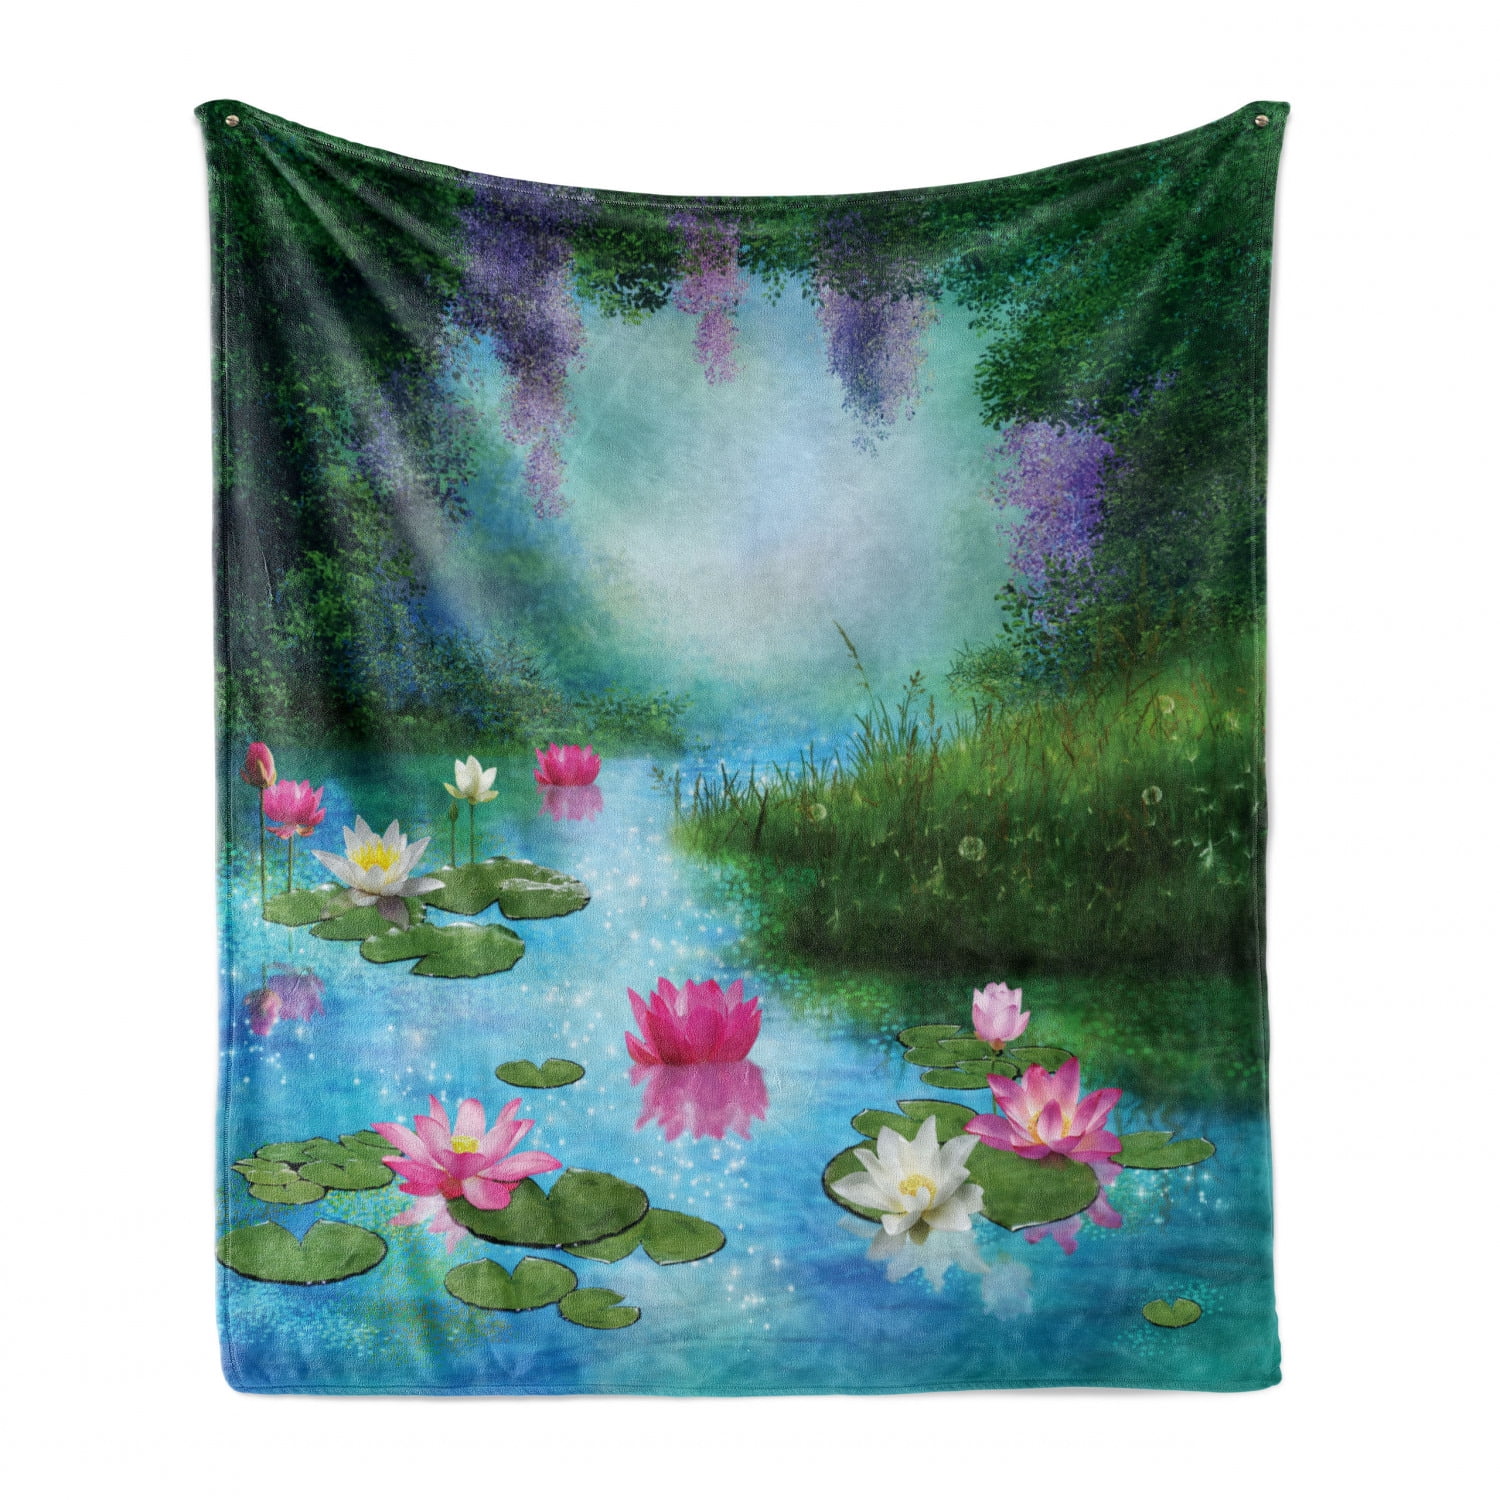 Aqua Pink Green Fantasy Pond Water Lilies Floating Romantic Lotus Digital Art 50 x 60 Cozy Plush for Indoor and Outdoor Use Ambesonne Nature Soft Flannel Fleece Throw Blanket 